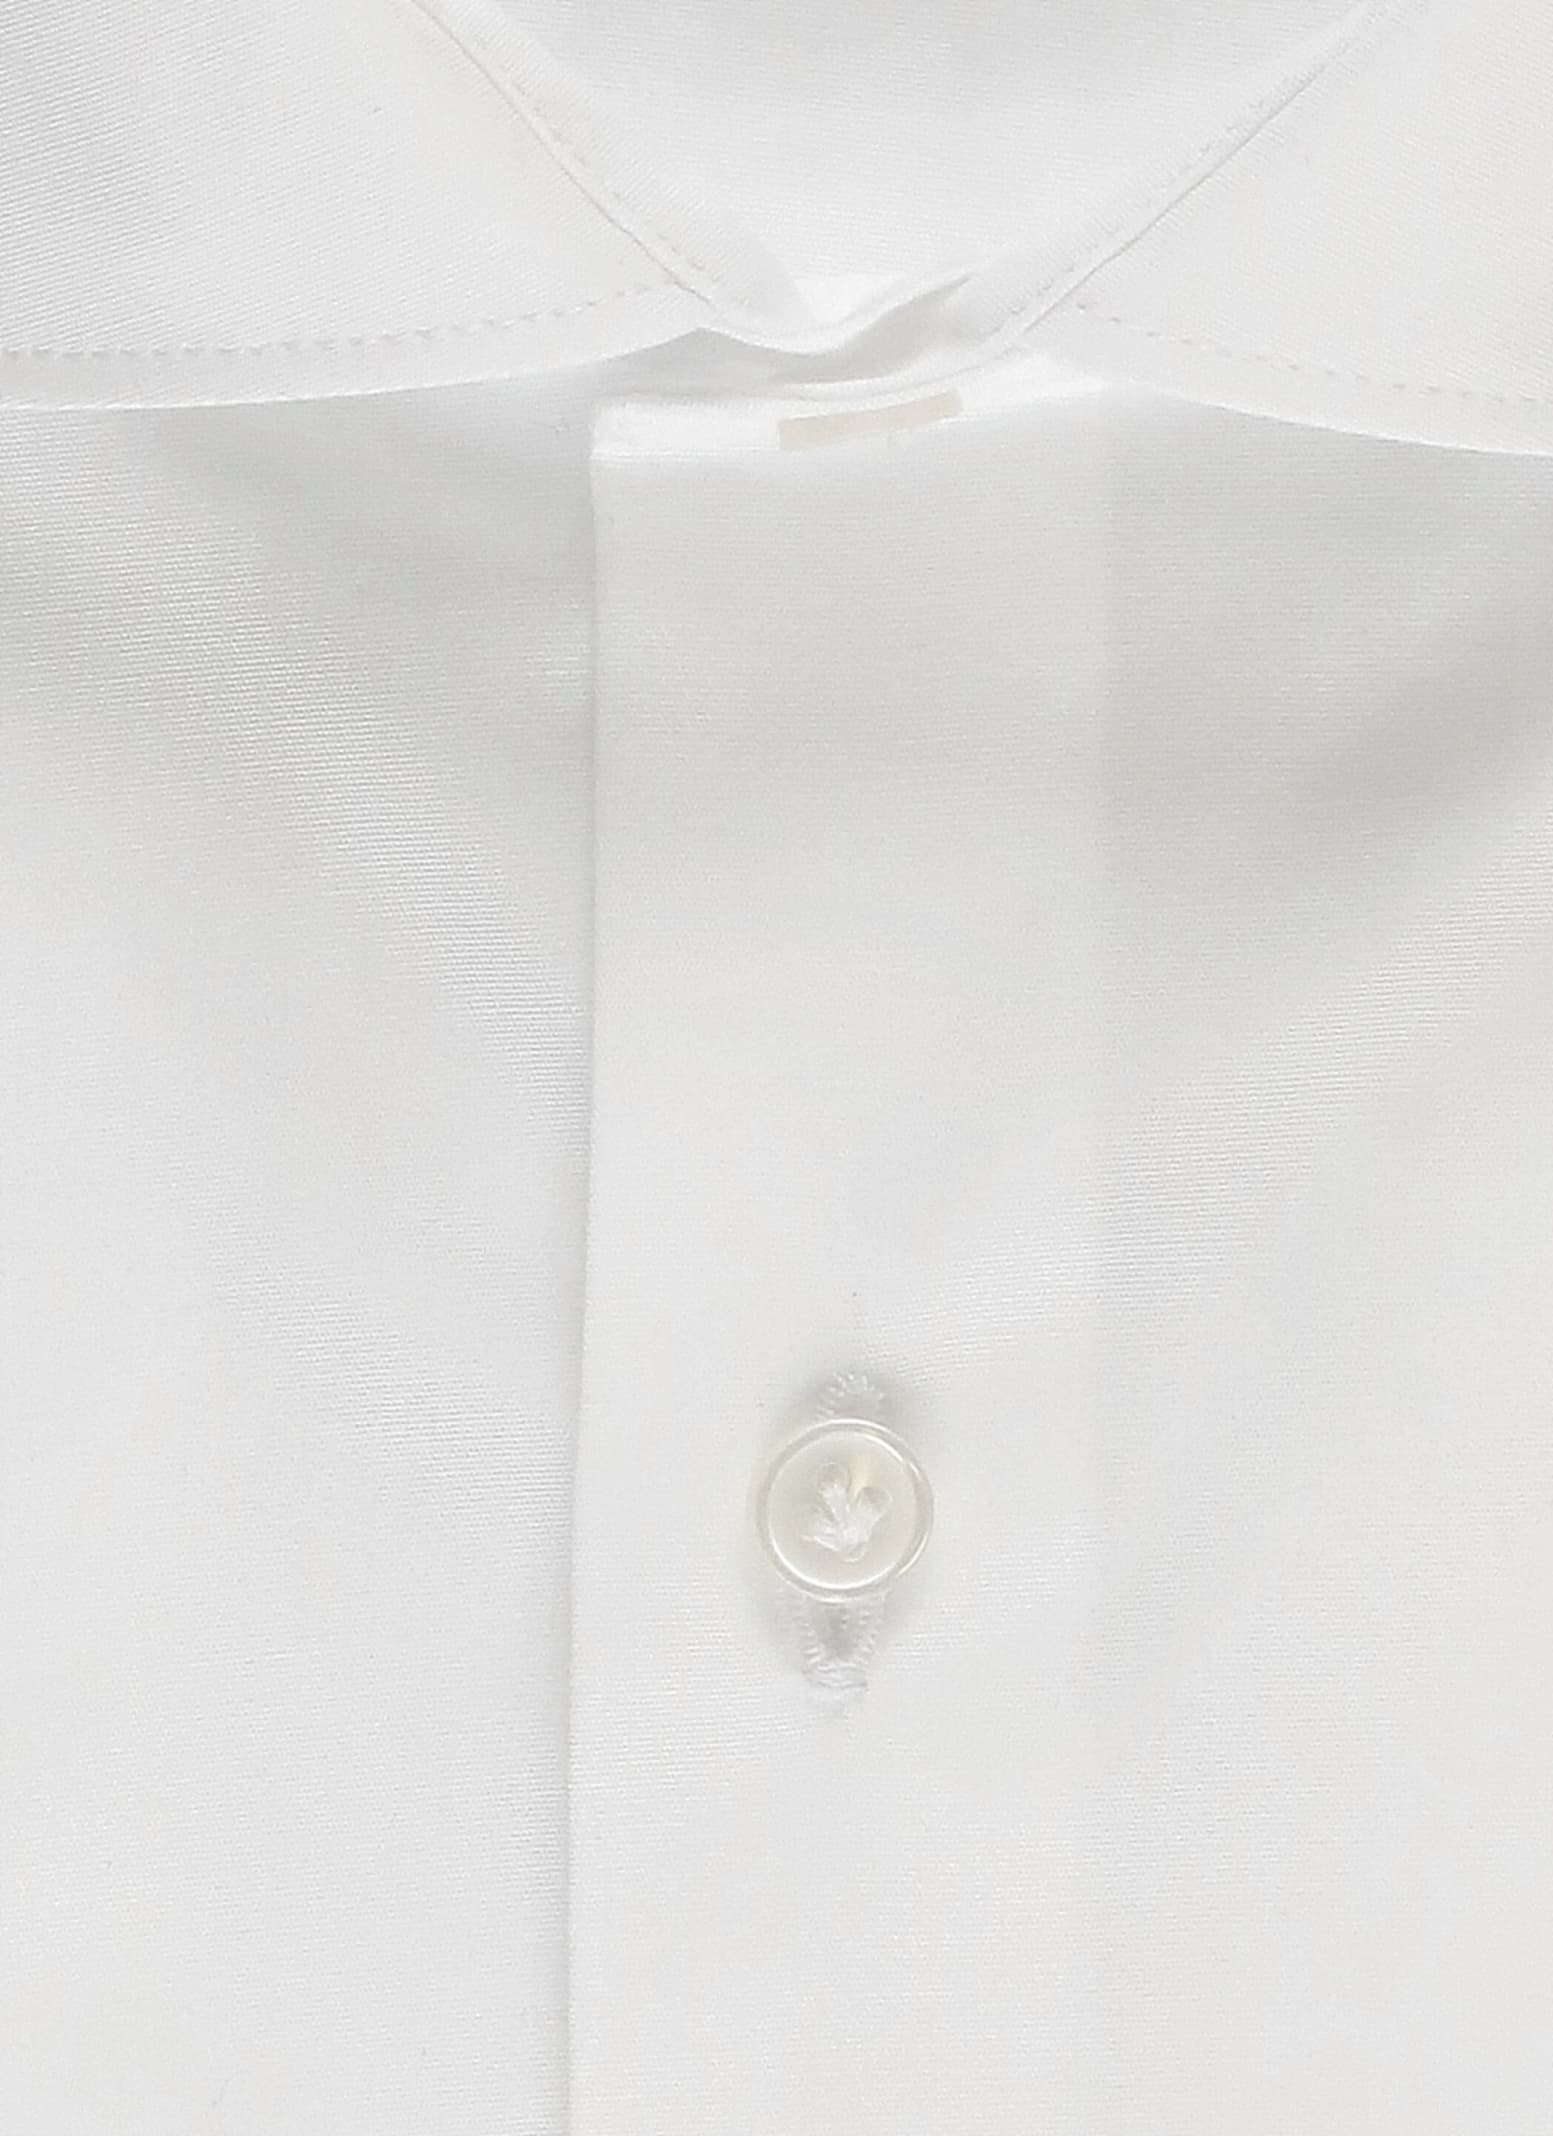 Shop Fay Cotton Shirt In White